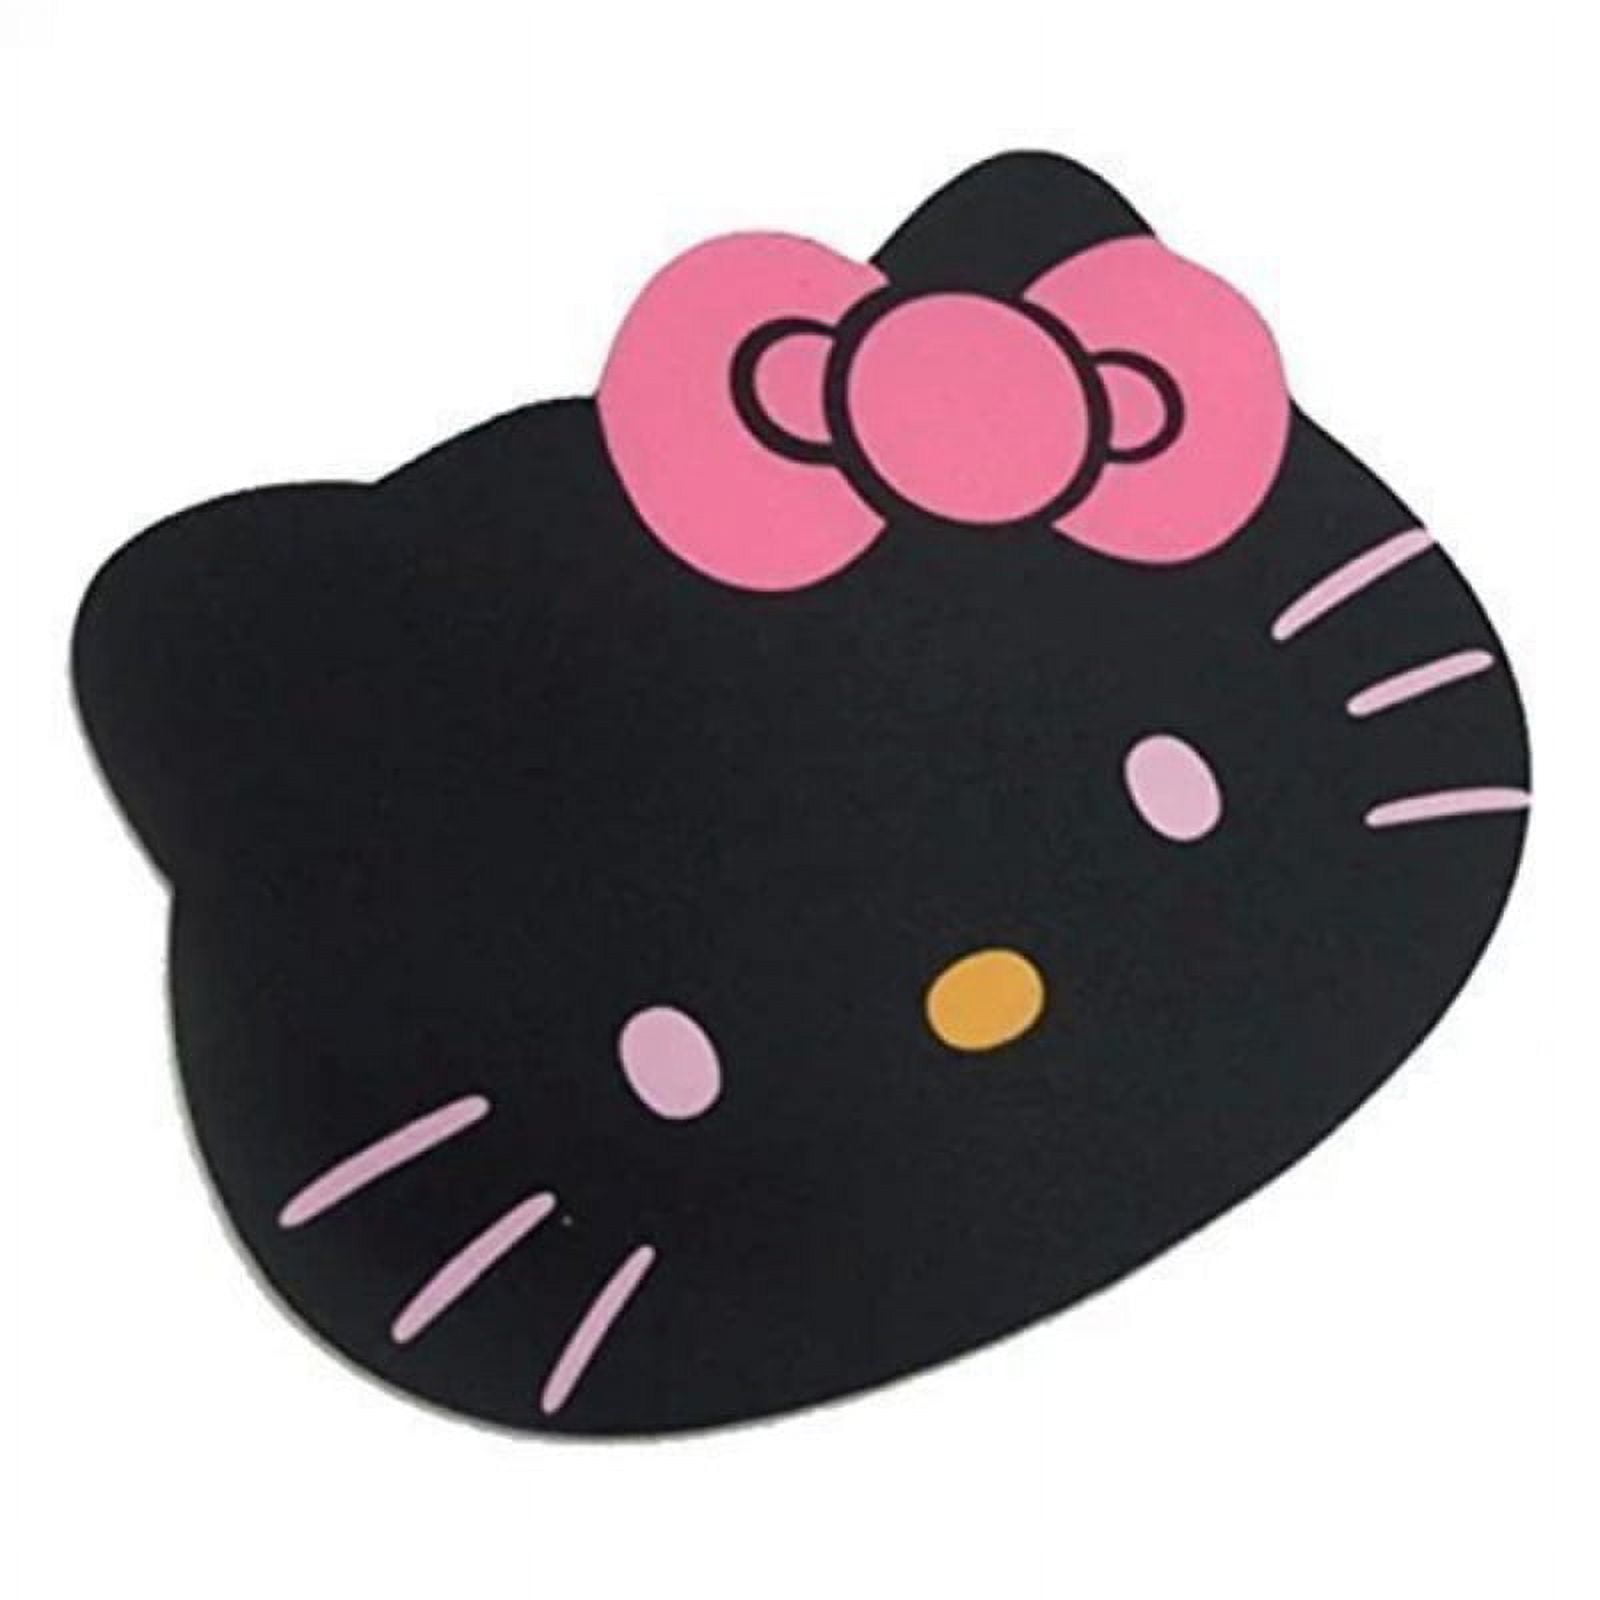  Everyday-deal Fashion Cartoon Hello Kitty Optical Mouse pad  Personalized Computer Decoration Mouse Pad Mat Non-Toxic Tasteless Mice Mat  Mousepad, Rubber (Pink) : Office Products